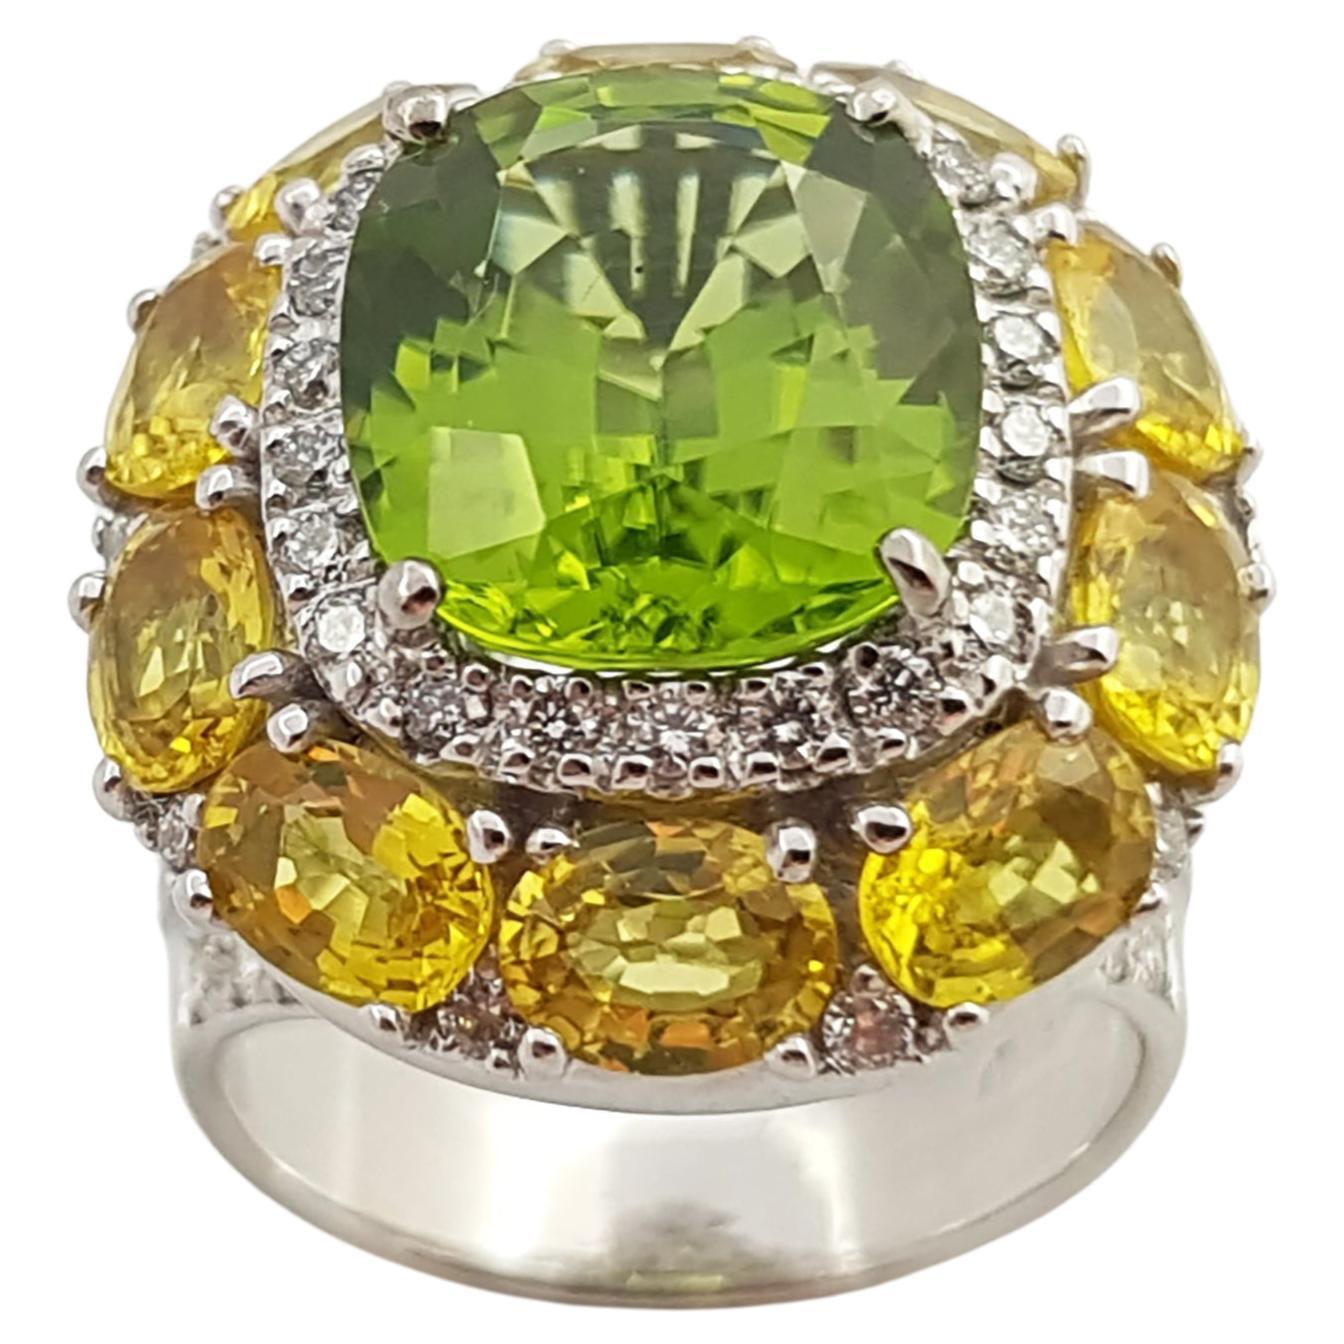 Cushion Cut Peridot, Yellow Sapphire with Diamond Ring in 18 Karat White Gold For Sale